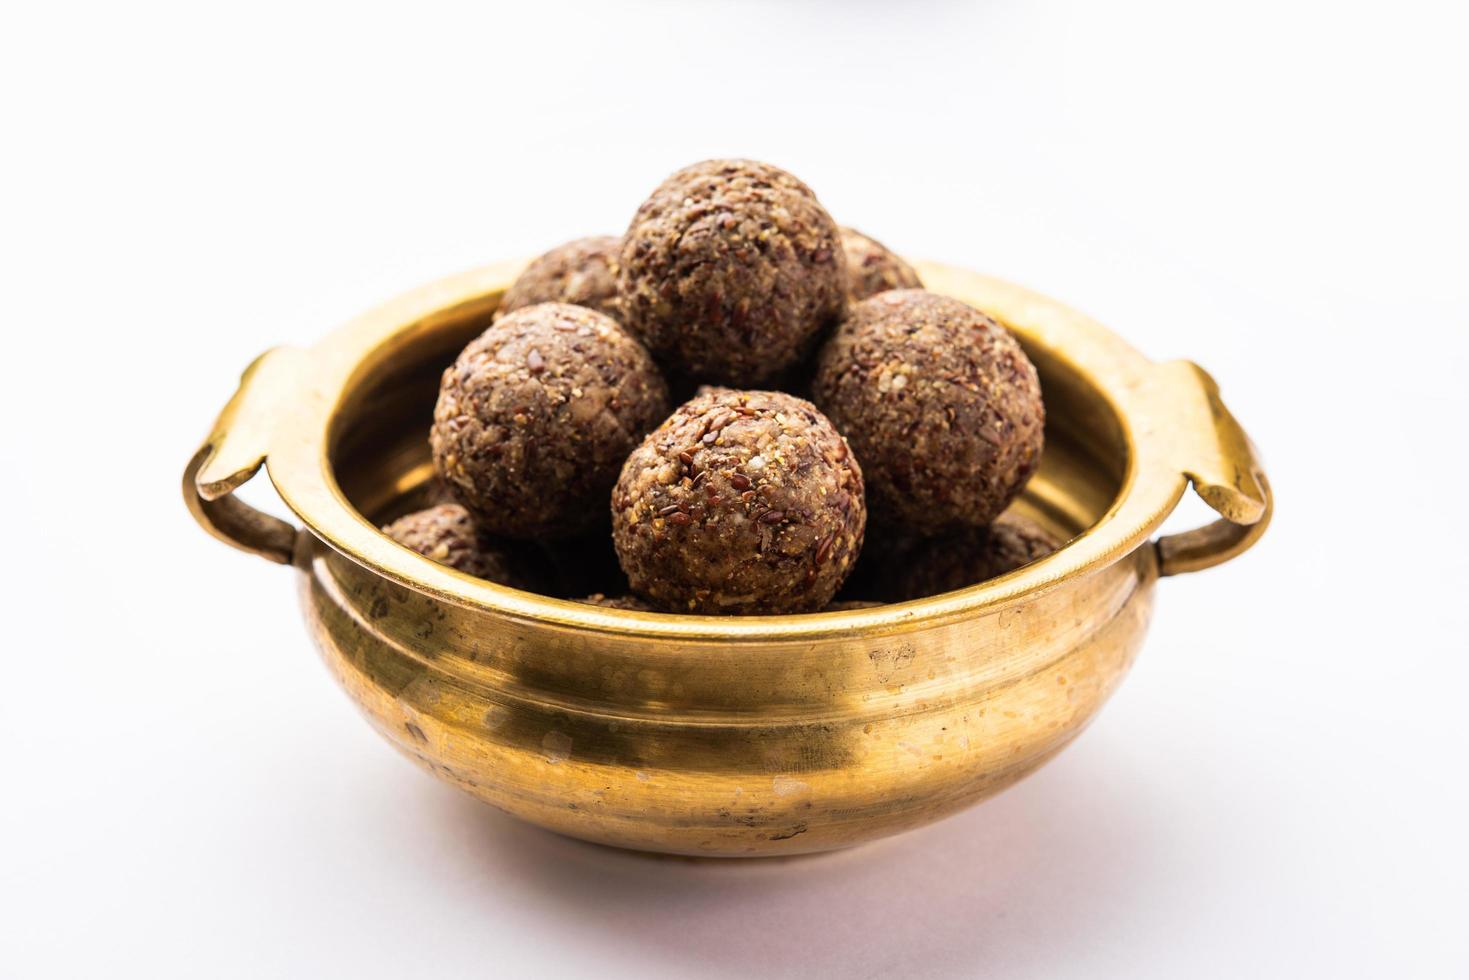 Alsi pinni laddu or flax seed laddo or healthy jawas ladoo are delicious Indian sweet energy balls photo